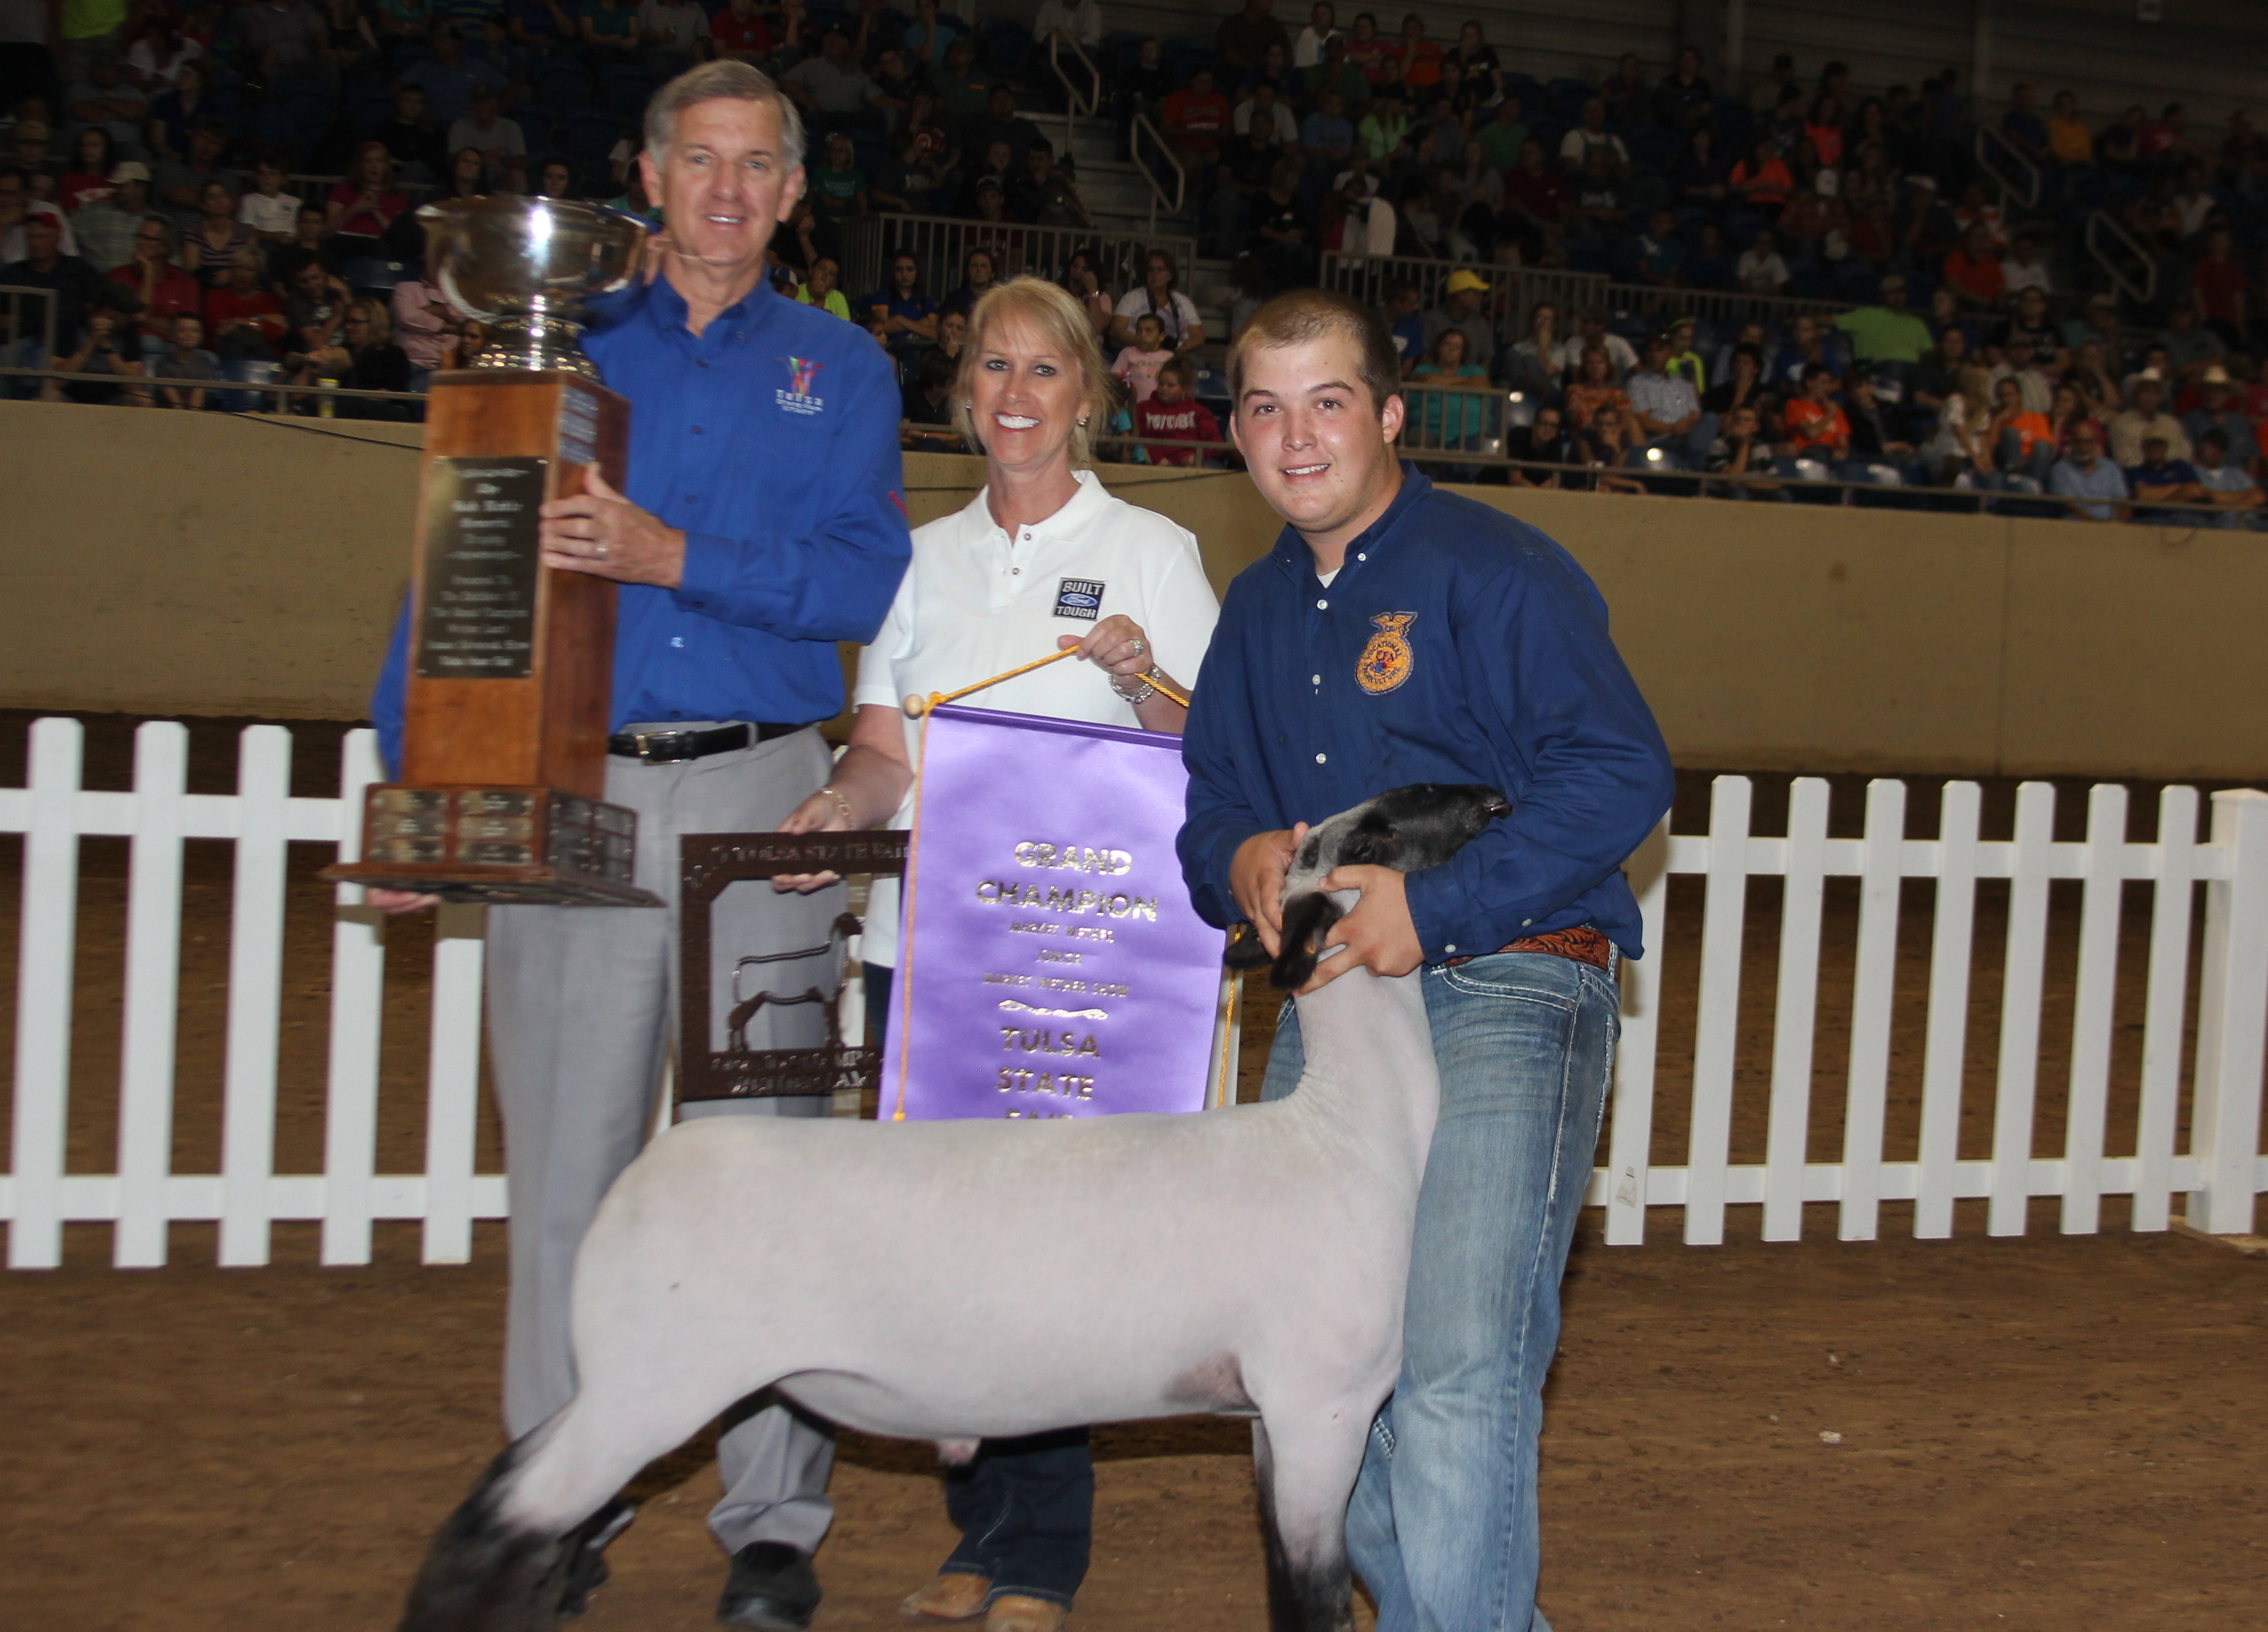 Pictures of the Grand Champions Selected at 2013 Tulsa State Fair